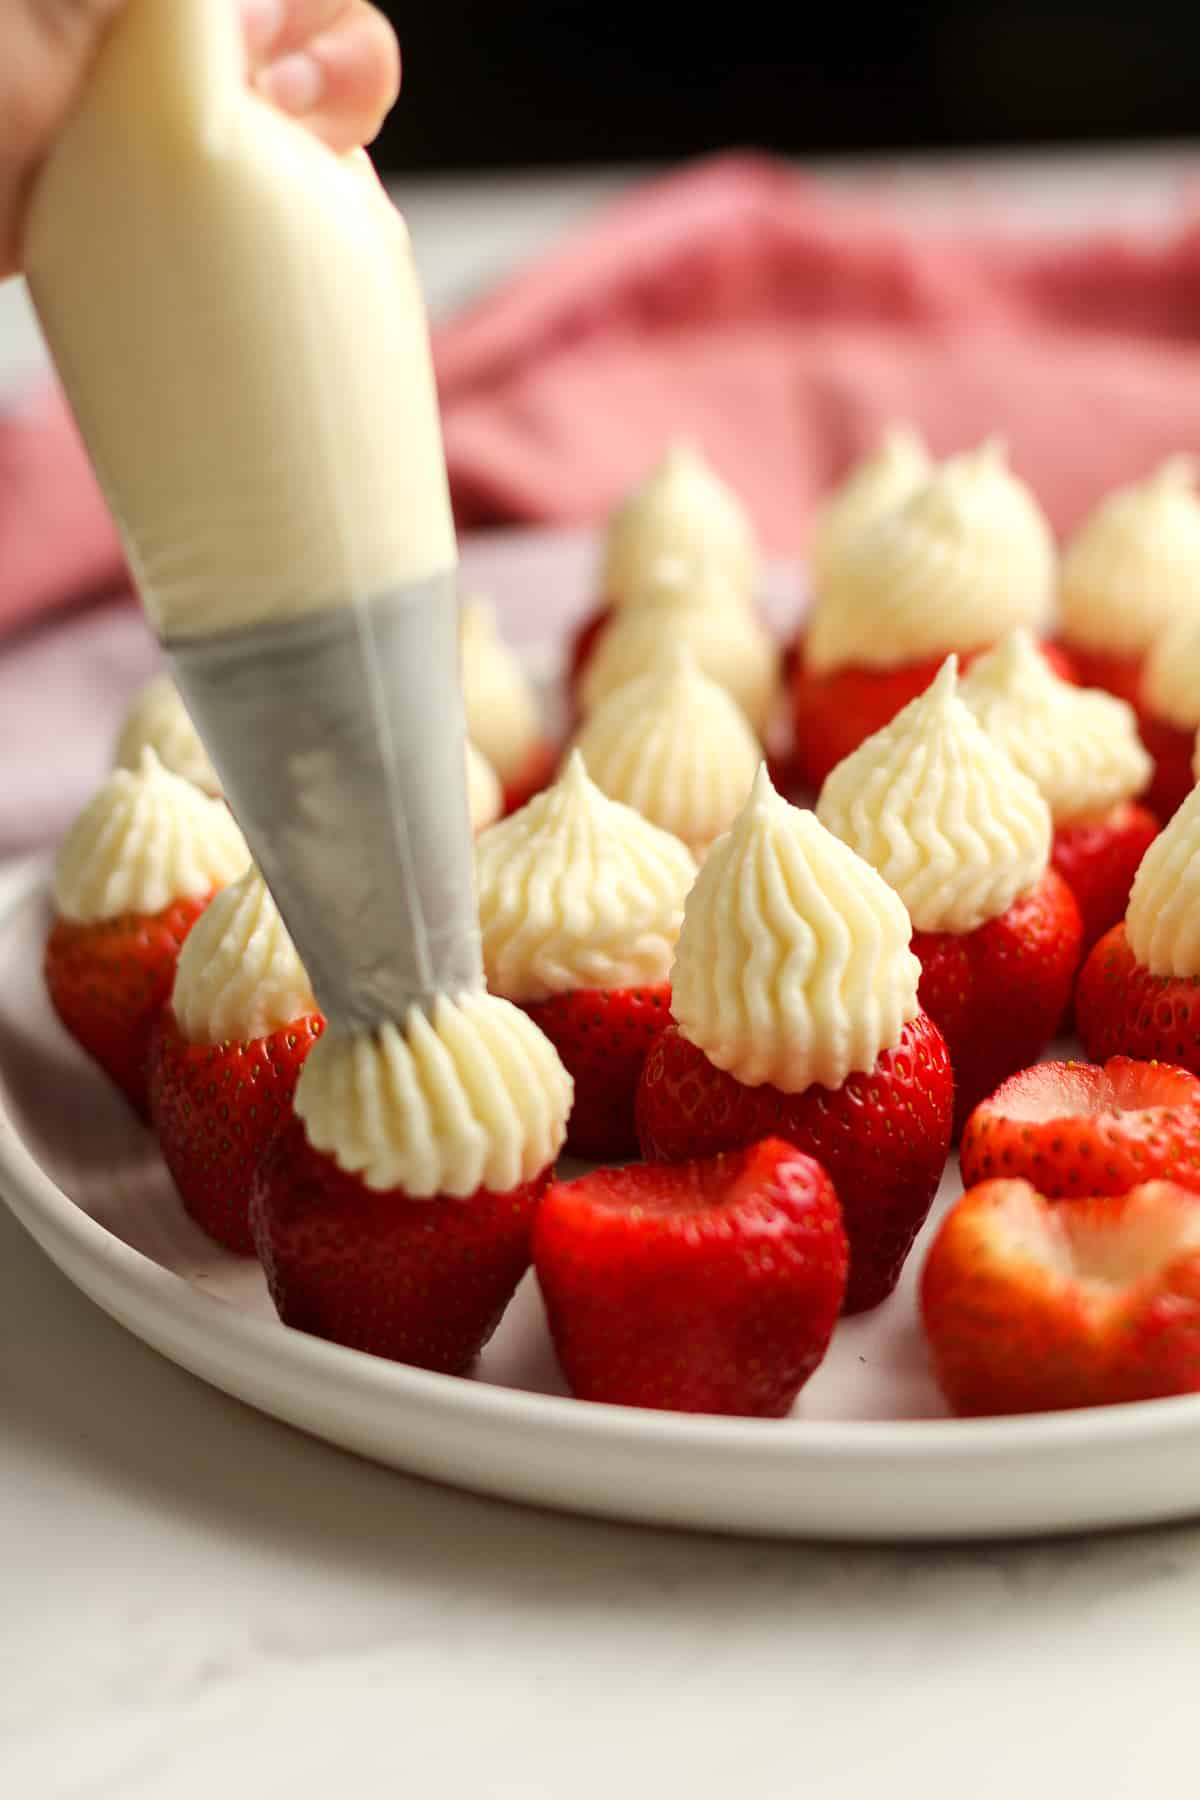 My hand squeezing the cream cheese filling on to the hulled strawberries.